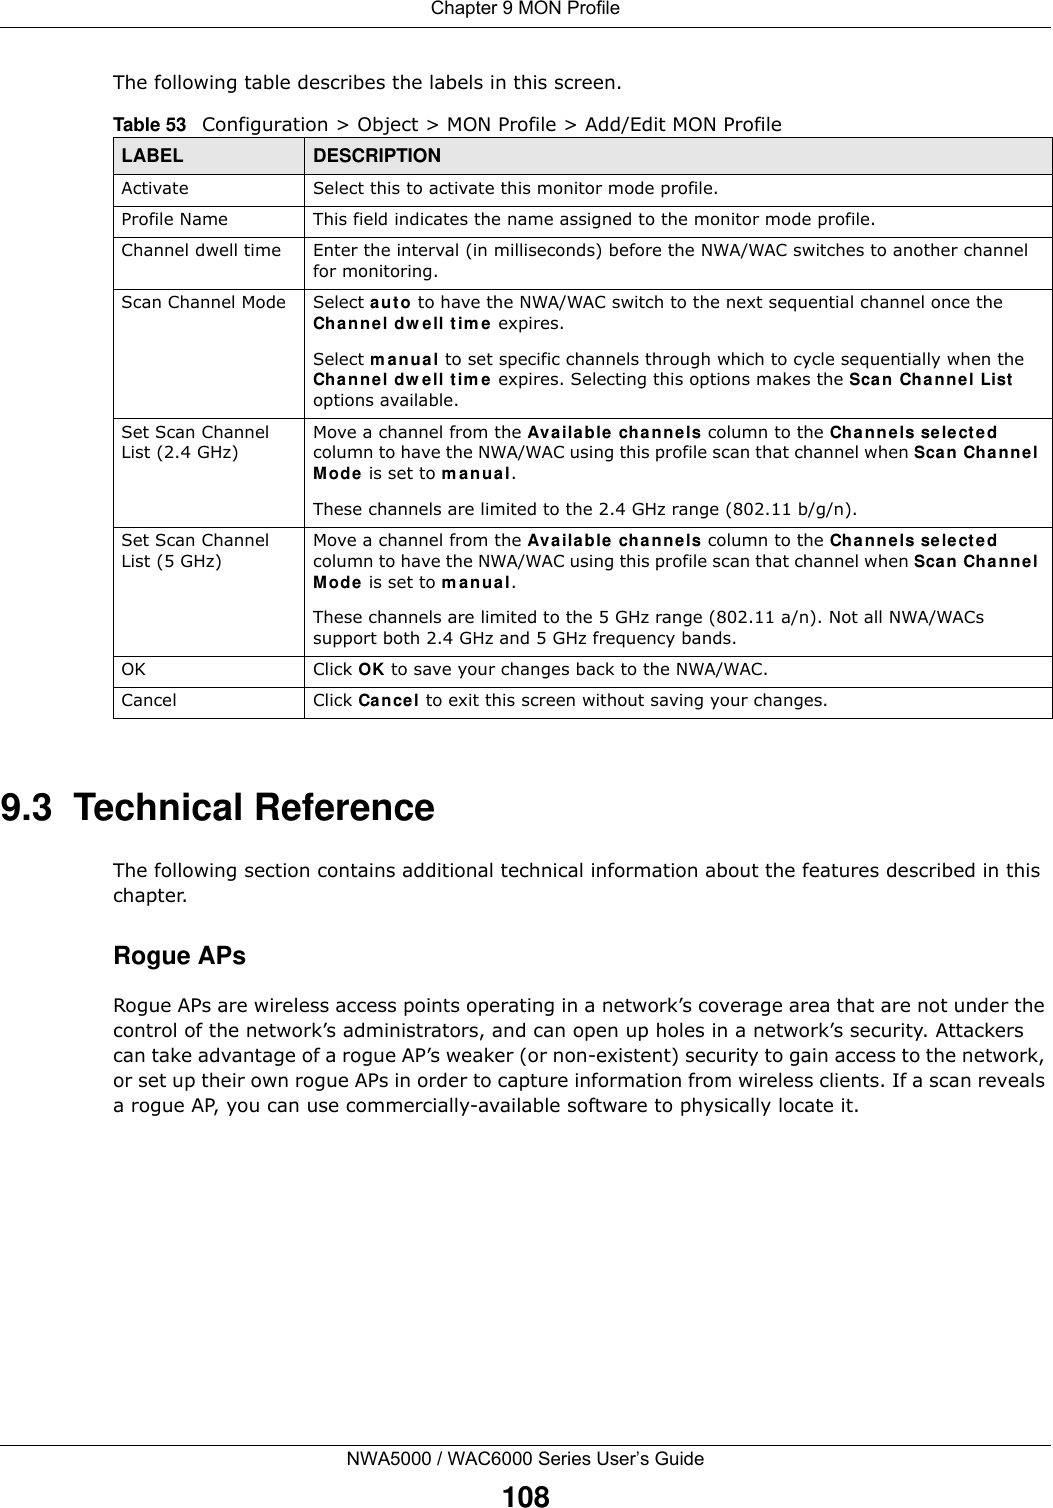 Chapter 9 MON ProfileNWA5000 / WAC6000 Series User’s Guide108The following table describes the labels in this screen.  9.3  Technical ReferenceThe following section contains additional technical information about the features described in this chapter.Rogue APsRogue APs are wireless access points operating in a network’s coverage area that are not under the control of the network’s administrators, and can open up holes in a network’s security. Attackers can take advantage of a rogue AP’s weaker (or non-existent) security to gain access to the network, or set up their own rogue APs in order to capture information from wireless clients. If a scan reveals a rogue AP, you can use commercially-available software to physically locate it.Table 53   Configuration &gt; Object &gt; MON Profile &gt; Add/Edit MON ProfileLABEL DESCRIPTIONActivate Select this to activate this monitor mode profile.Profile Name This field indicates the name assigned to the monitor mode profile.Channel dwell time Enter the interval (in milliseconds) before the NWA/WAC switches to another channel for monitoring.Scan Channel Mode Select a ut o to have the NWA/WAC switch to the next sequential channel once the Channel dw ell t im e expires.Select m anual to set specific channels through which to cycle sequentially when the Channel dw ell t im e expires. Selecting this options makes the Sca n  Channel List  options available.Set Scan Channel List (2.4 GHz)Move a channel from the Ava ilable  cha nnels column to the Channels sele ct ed column to have the NWA/WAC using this profile scan that channel when Sca n  Channe l Mode is set to m anual.These channels are limited to the 2.4 GHz range (802.11 b/g/n).Set Scan Channel List (5 GHz)Move a channel from the Ava ilable  cha nnels column to the Channels sele ct ed column to have the NWA/WAC using this profile scan that channel when Sca n  Channe l Mode is set to m anual.These channels are limited to the 5 GHz range (802.11 a/n). Not all NWA/WACs support both 2.4 GHz and 5 GHz frequency bands.OK Click OK to save your changes back to the NWA/WAC.Cancel Click Cance l to exit this screen without saving your changes.